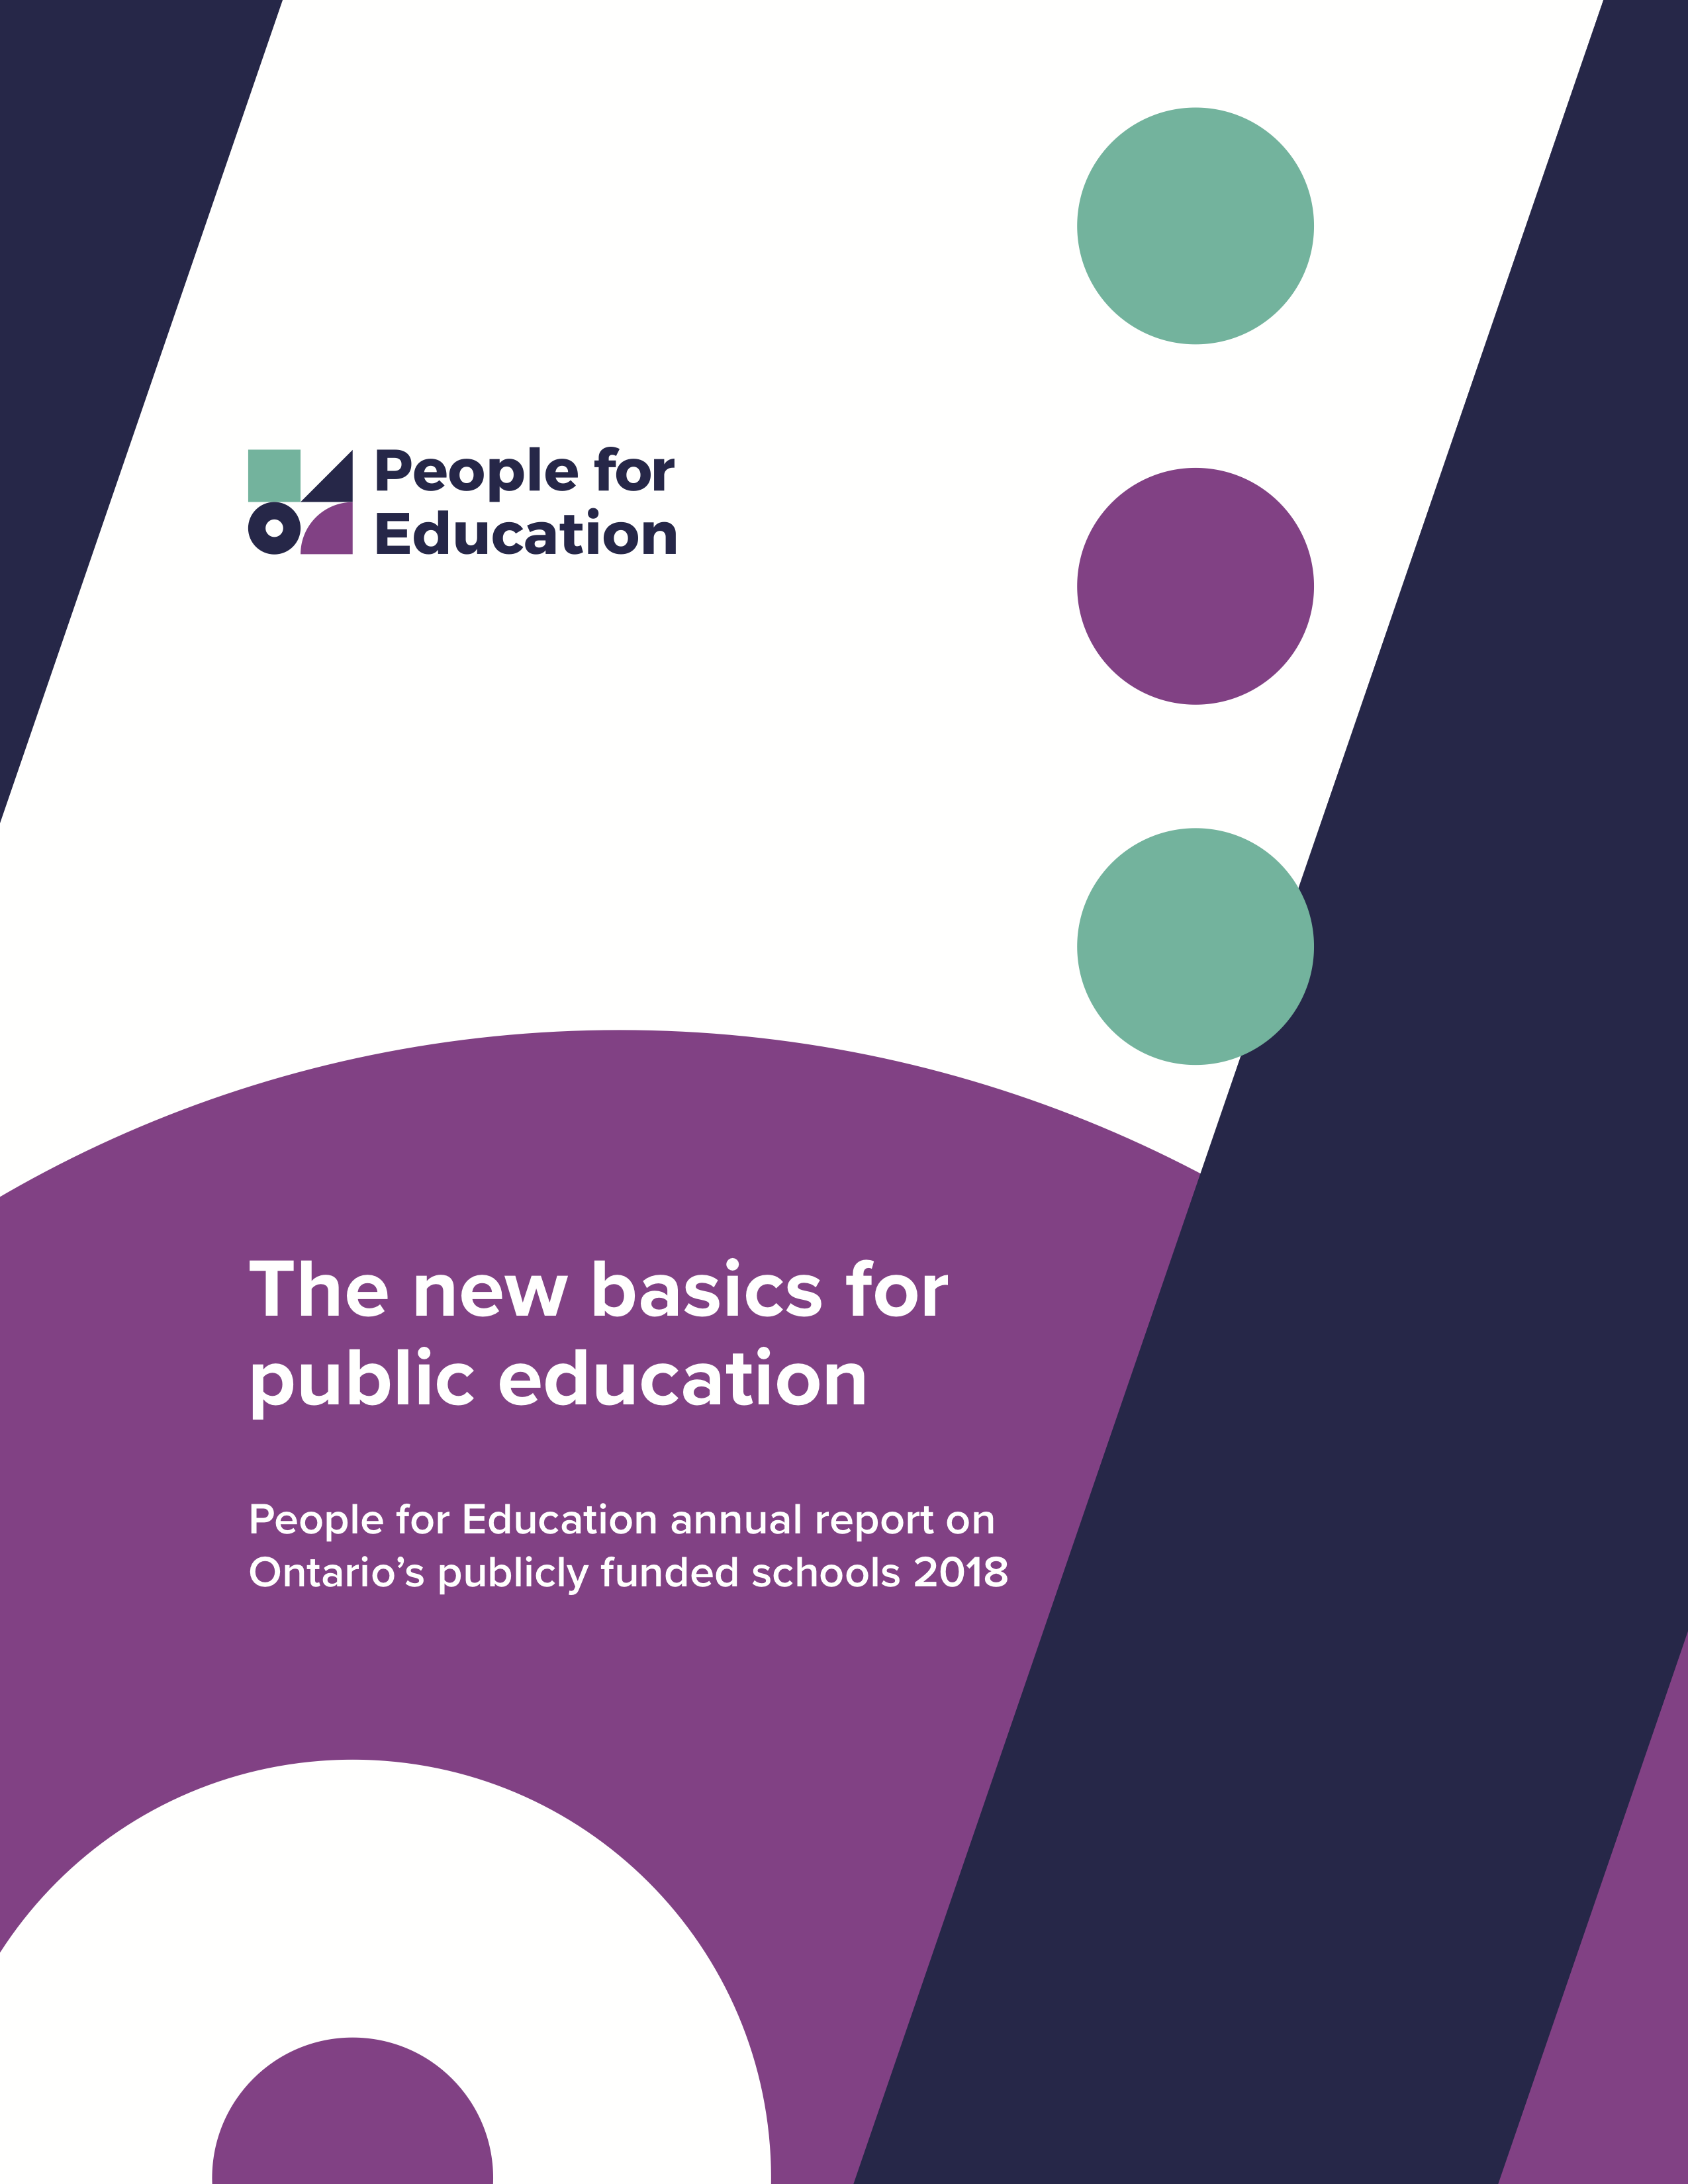 2018 Annual Report On Schools The New Basics For Public Education - 2018 annual report on schools the new basics for public education people for education